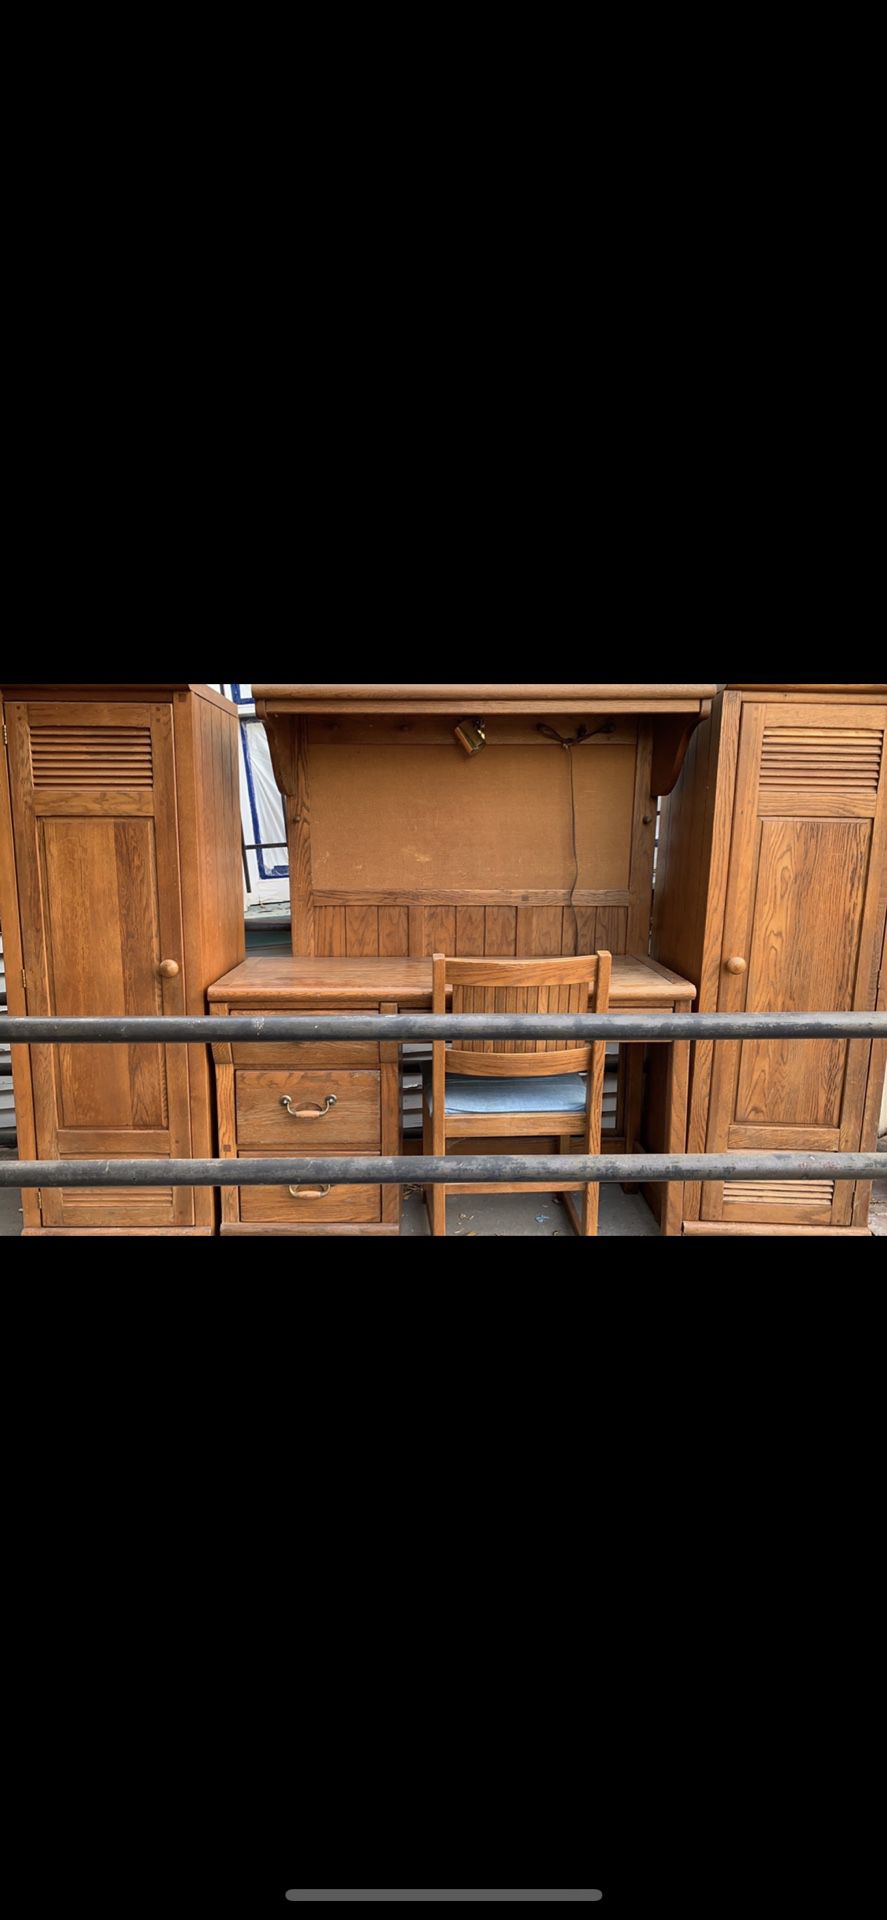 Very cute bedroom set. Twin headboard with overhead light and pegboard. Desk with chair. Two side lockers solid oak fits in a small bedroom nicely.